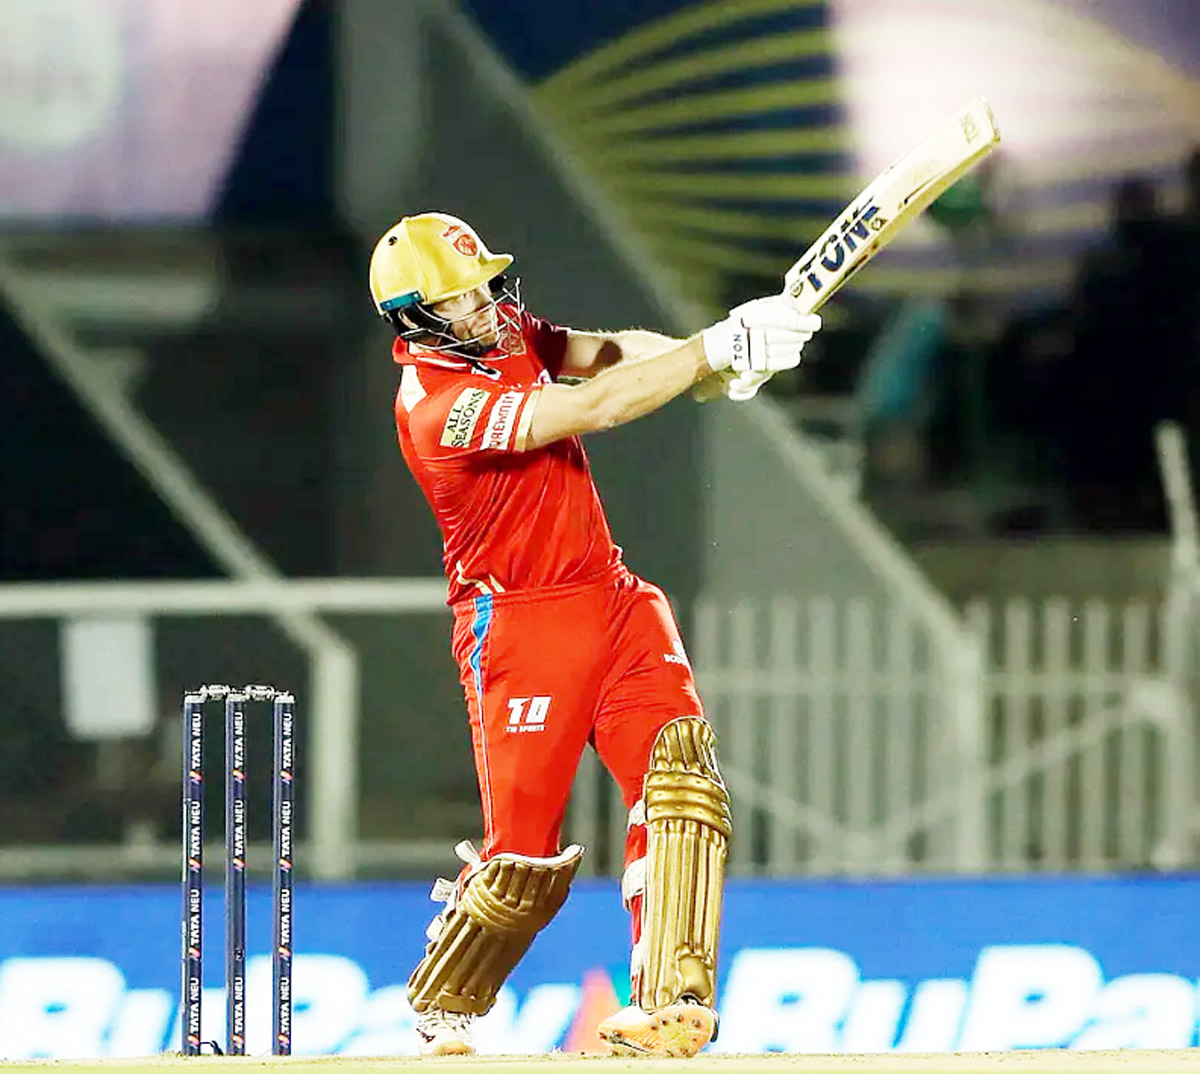 Jonny Bairstow playing a shot against RCB during a match at Mumbai.